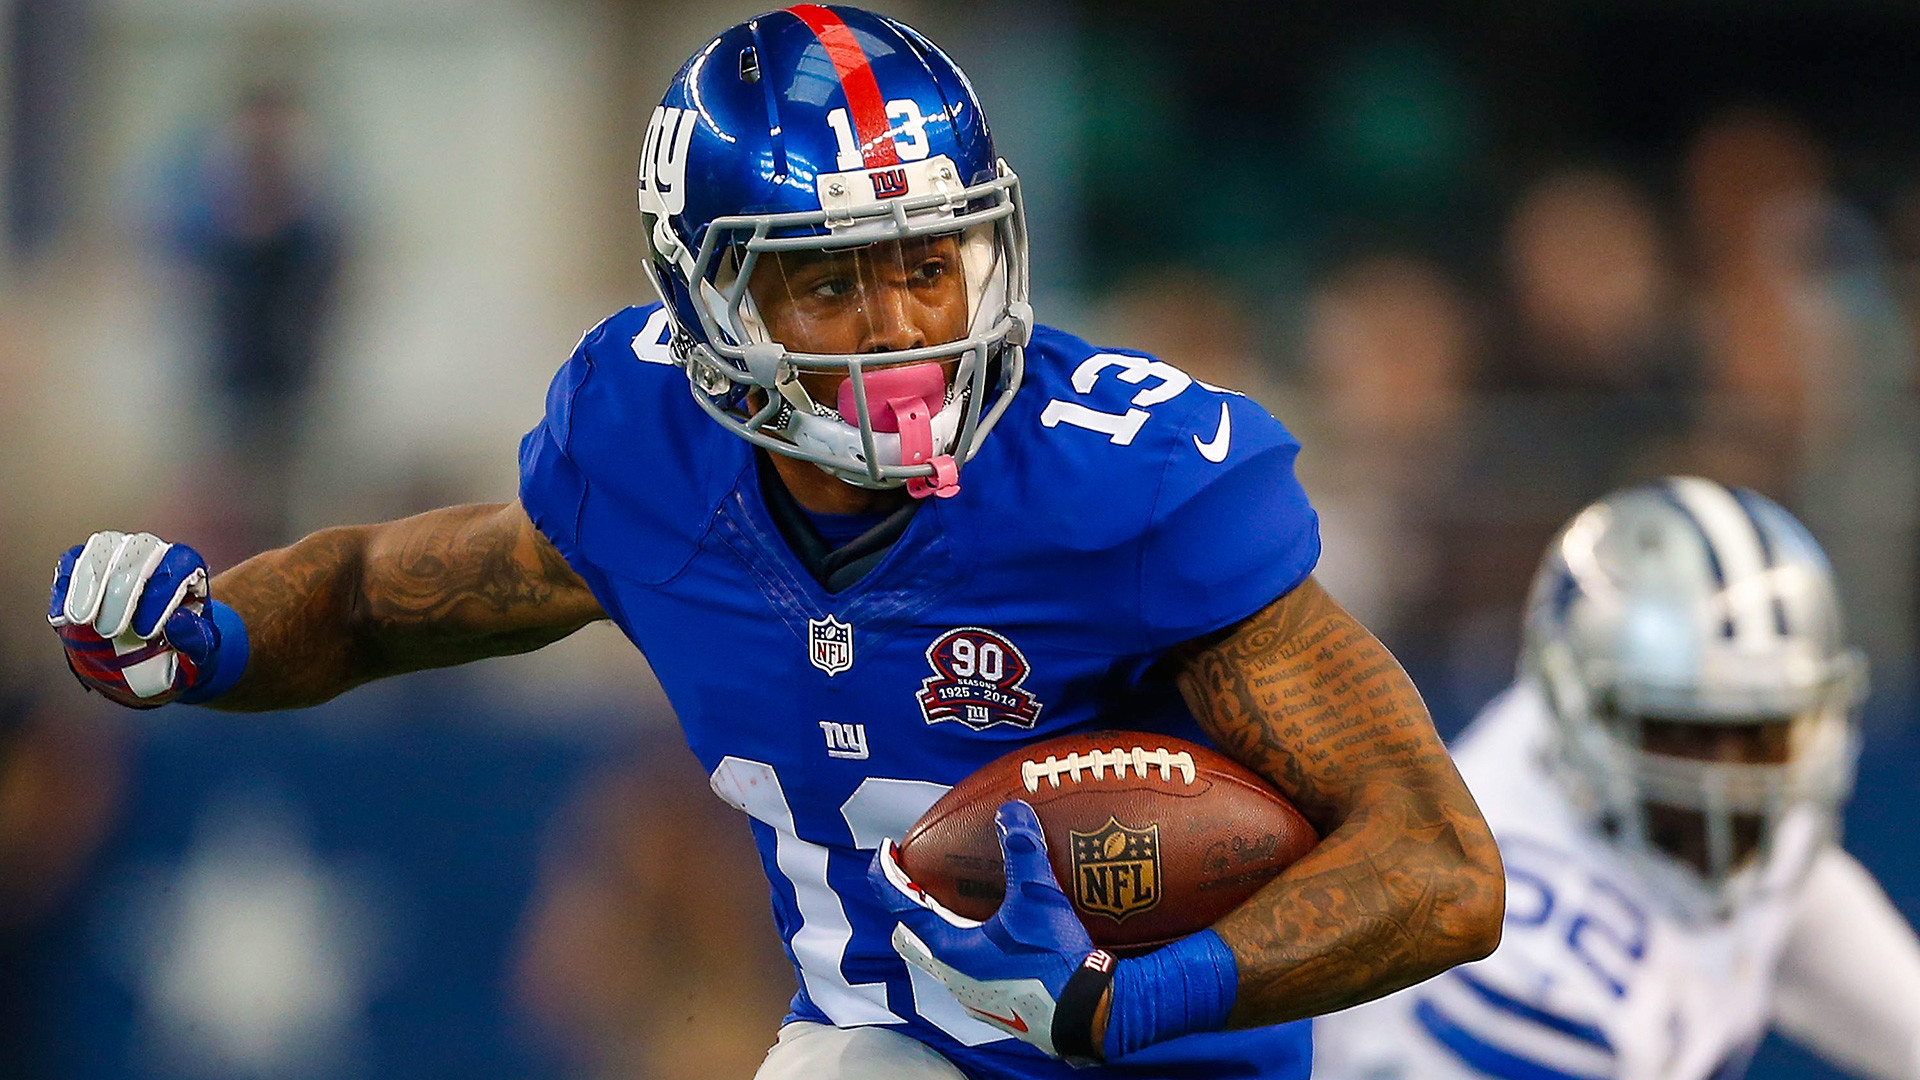 Odell Beckham created phenomenon by proving beginners don't need two hands  | Beckham jr, Odell beckham jr and Wide receiver